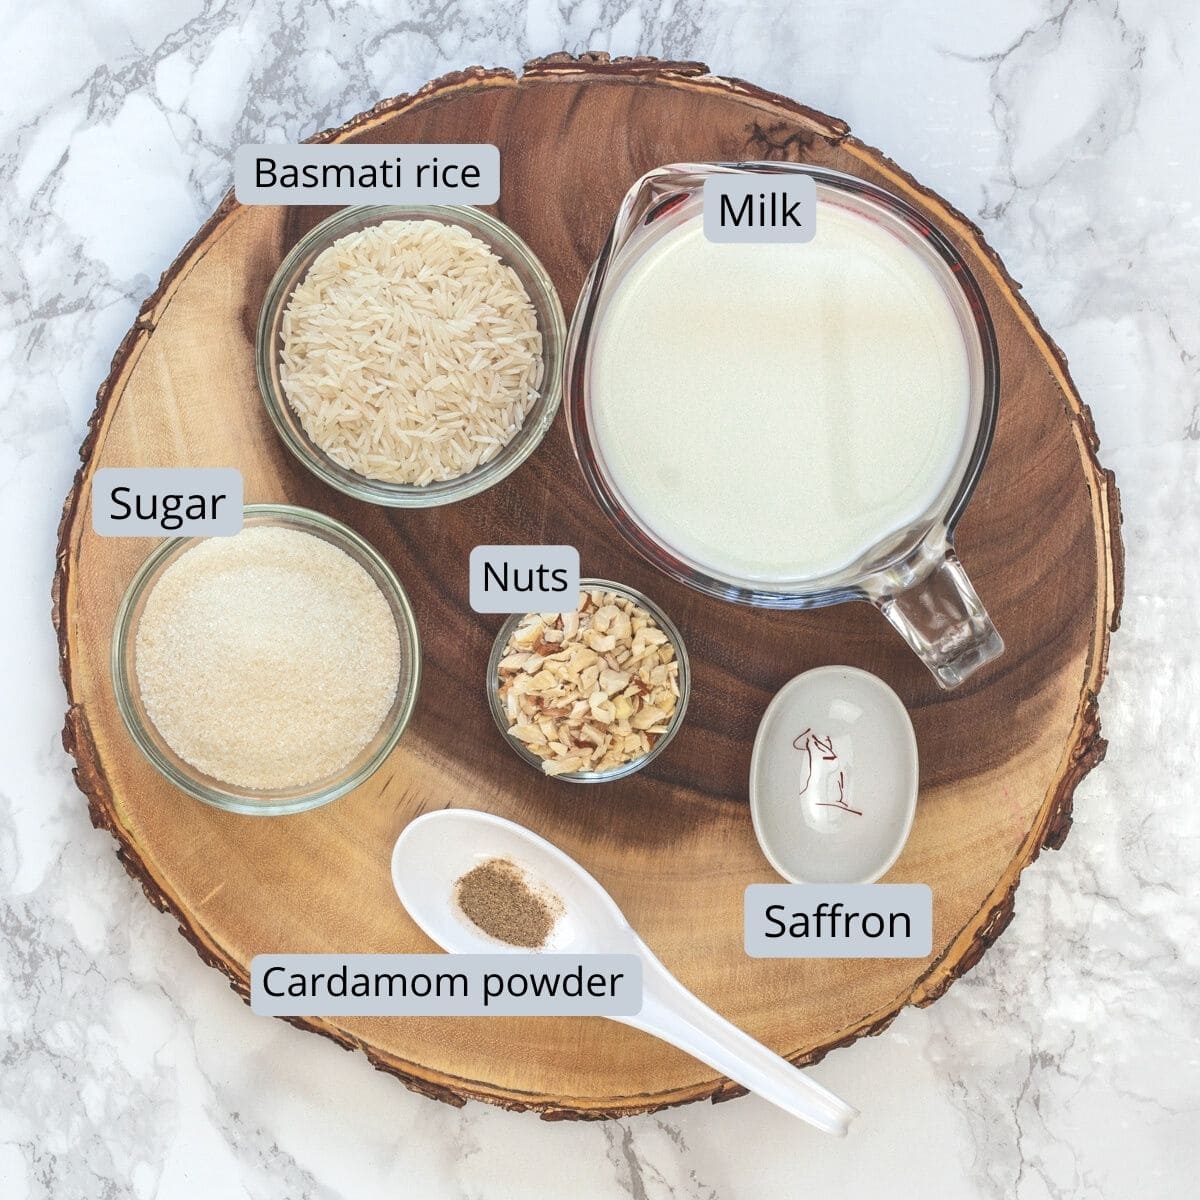 kheer ingredients in individual bowls on a wooden board.